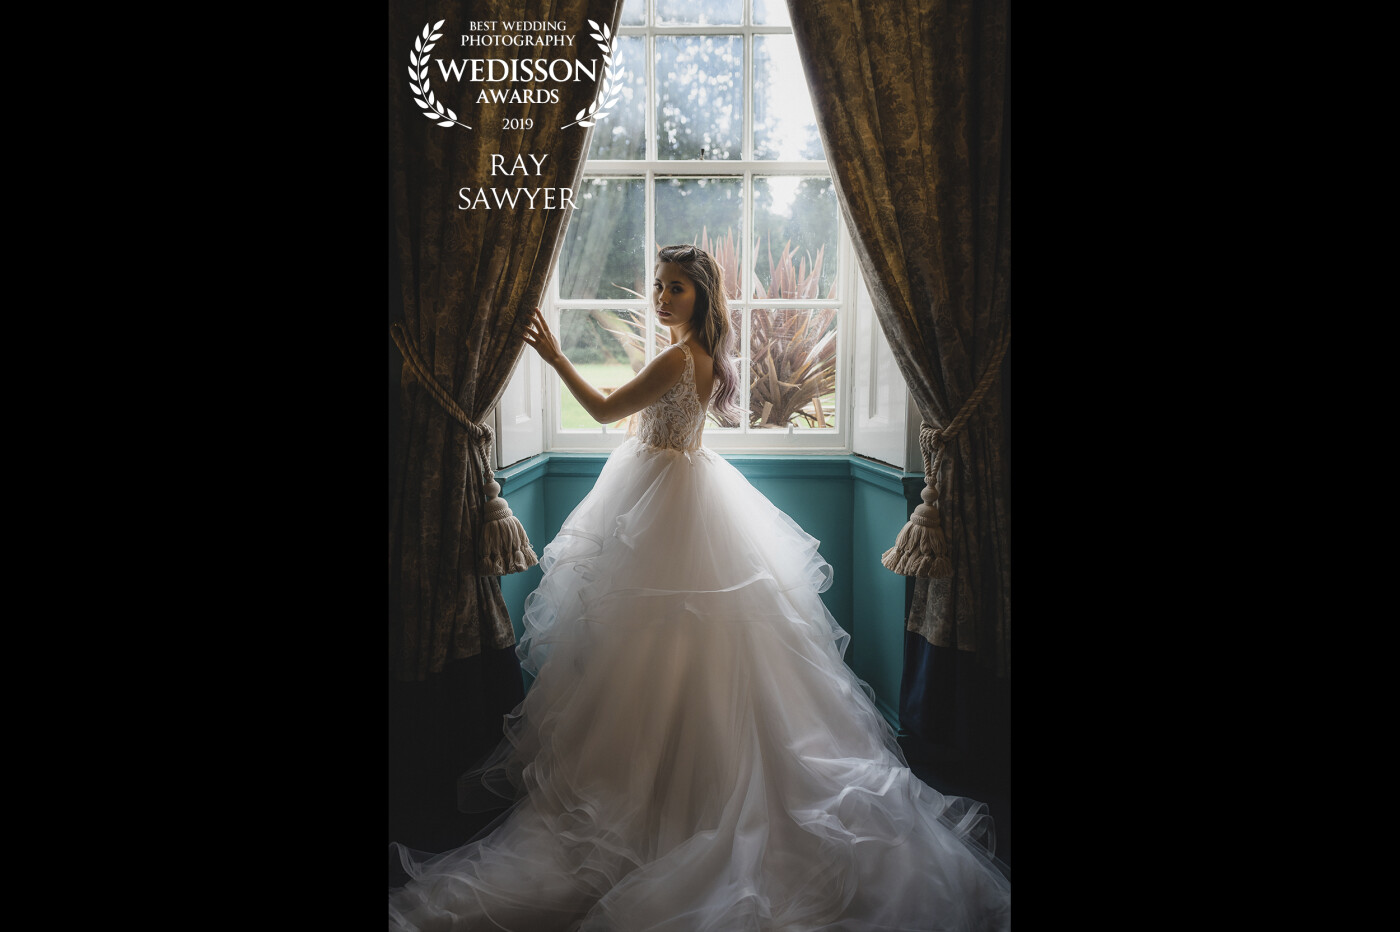 Jaime-Lee showcasing her beautiful wedding dress at Hallgarth Manor in Durham. The window frames her beautifully and the curtains provide a natural symmetry!